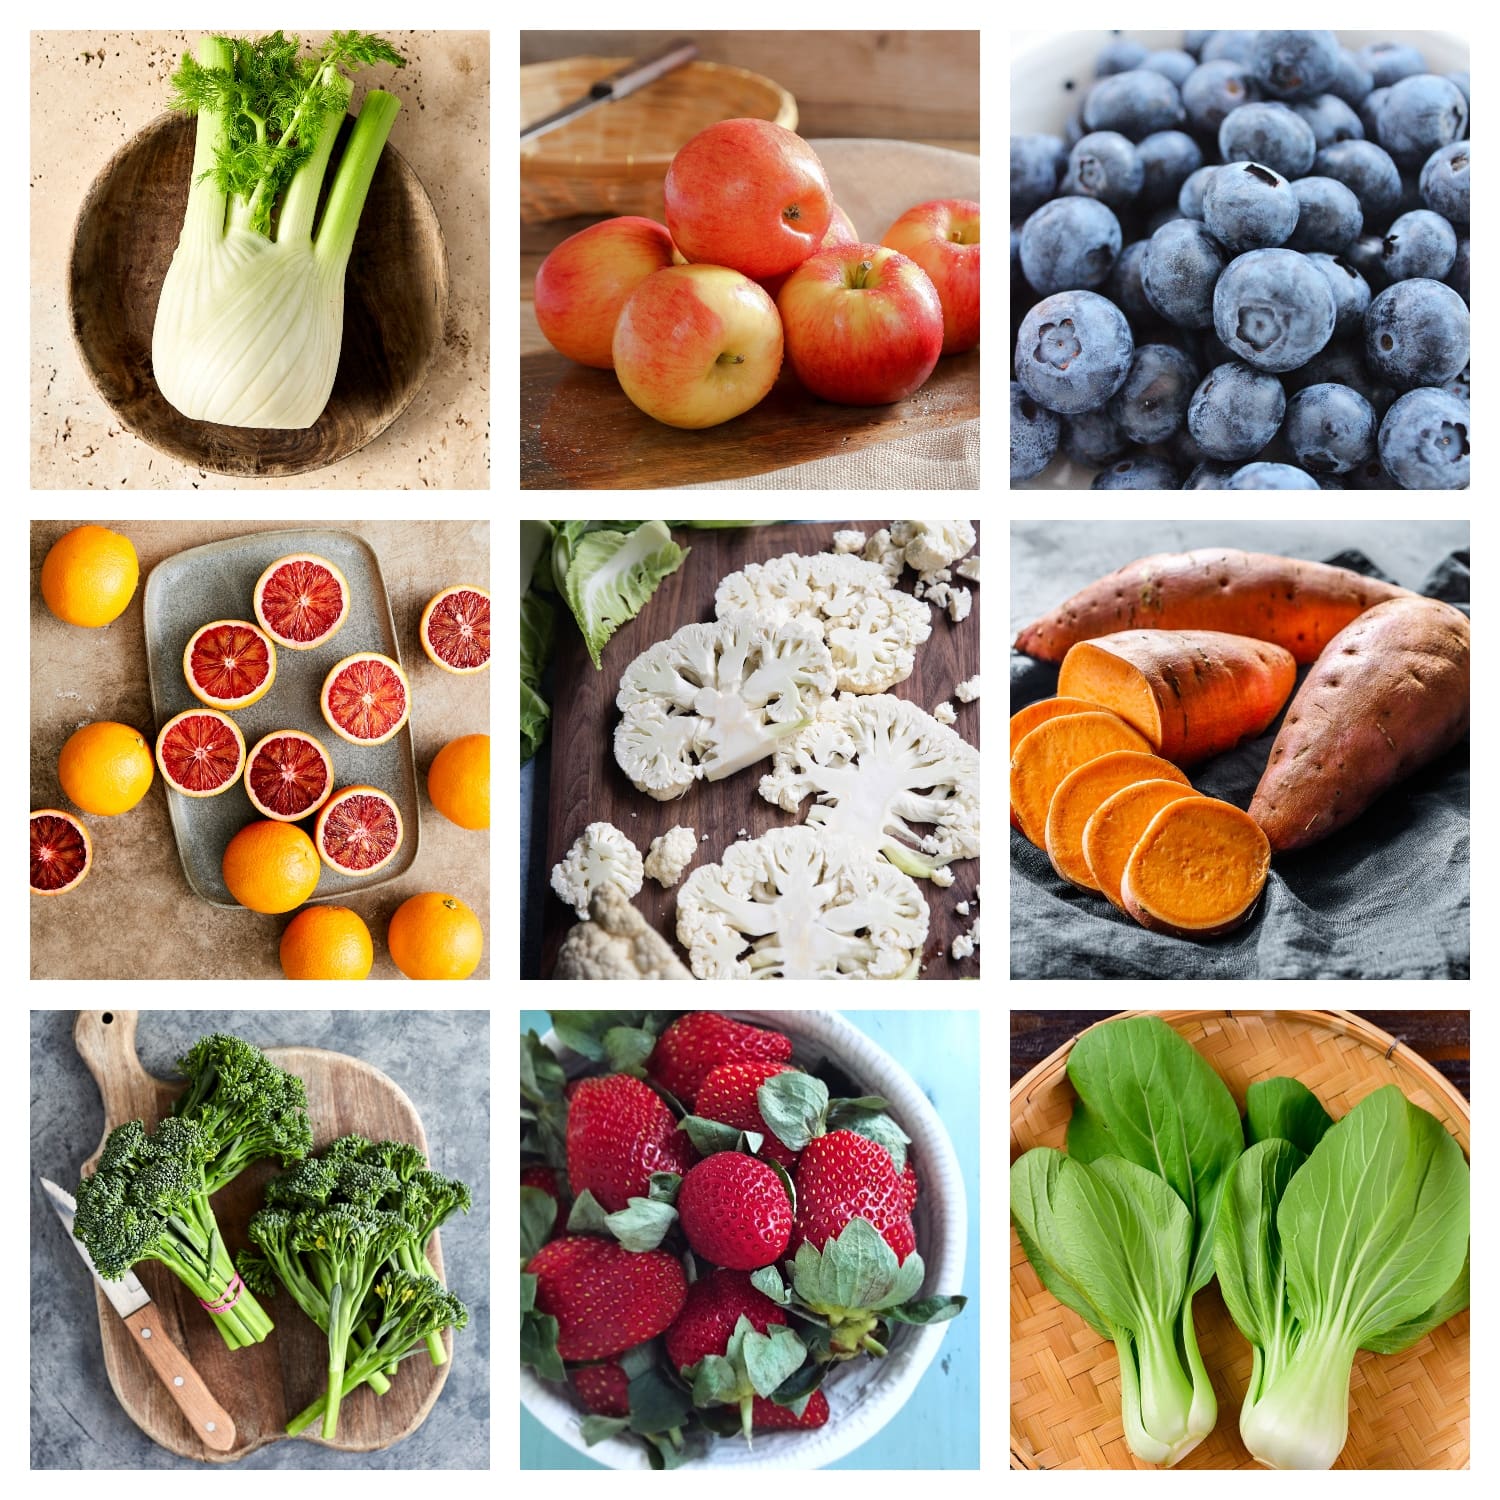 Dave's Market Update for the 10th of August 2022 includes Queensland strawberries, citrus fruit, green shanghai buk choy, blueberries, baby broccoli, kumera, apples, cauliflower, and fennel.  Find them in store and online.